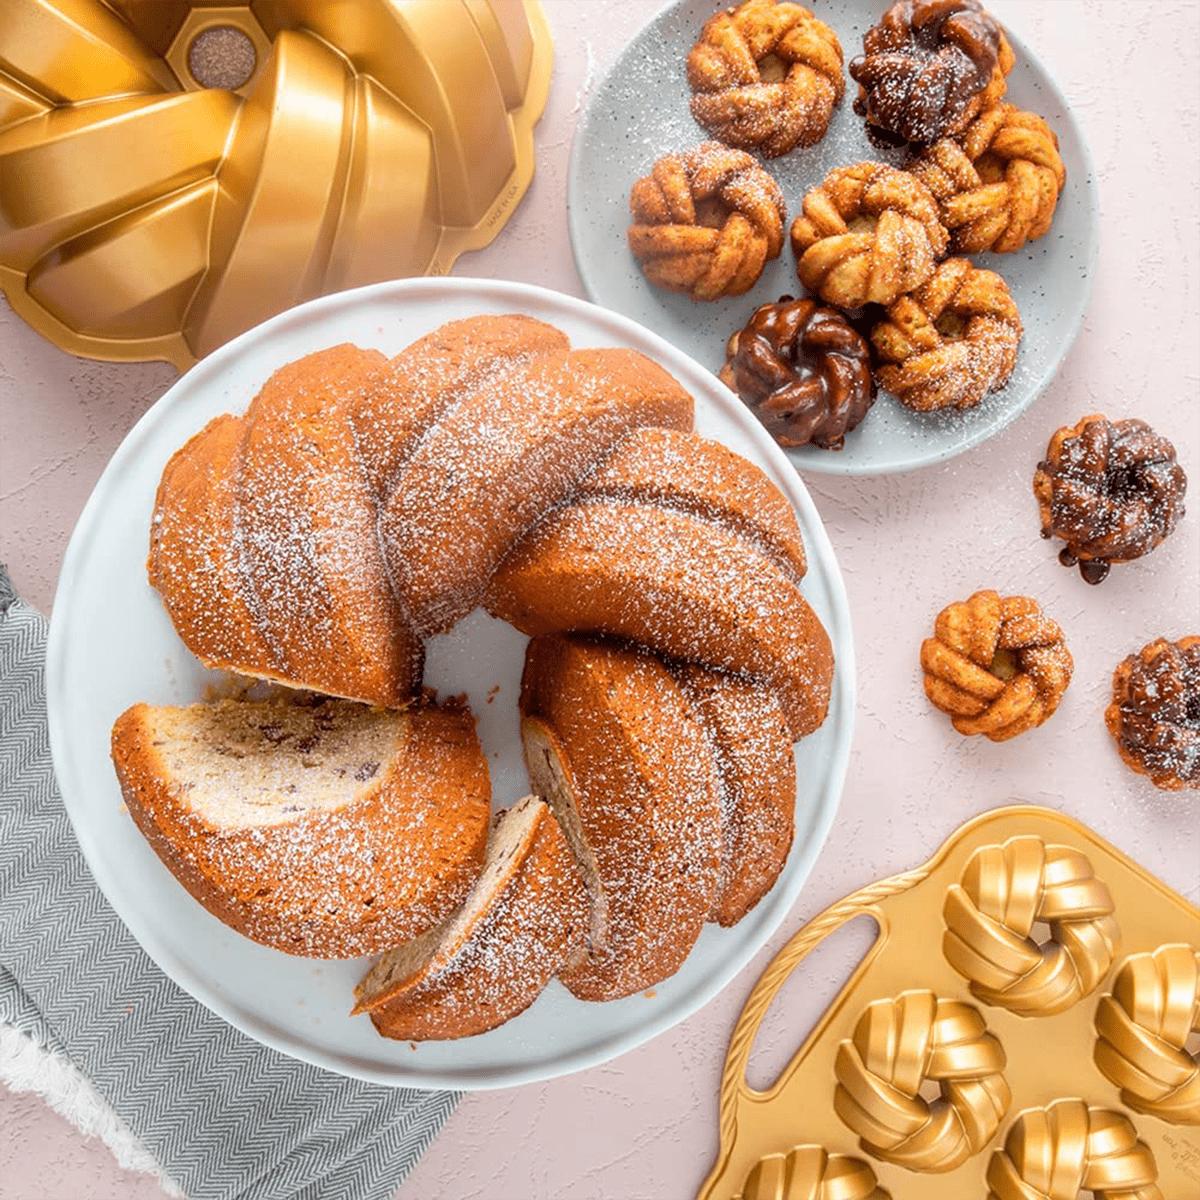 Baking Holiday Gift Guide - The Anthony Kitchen